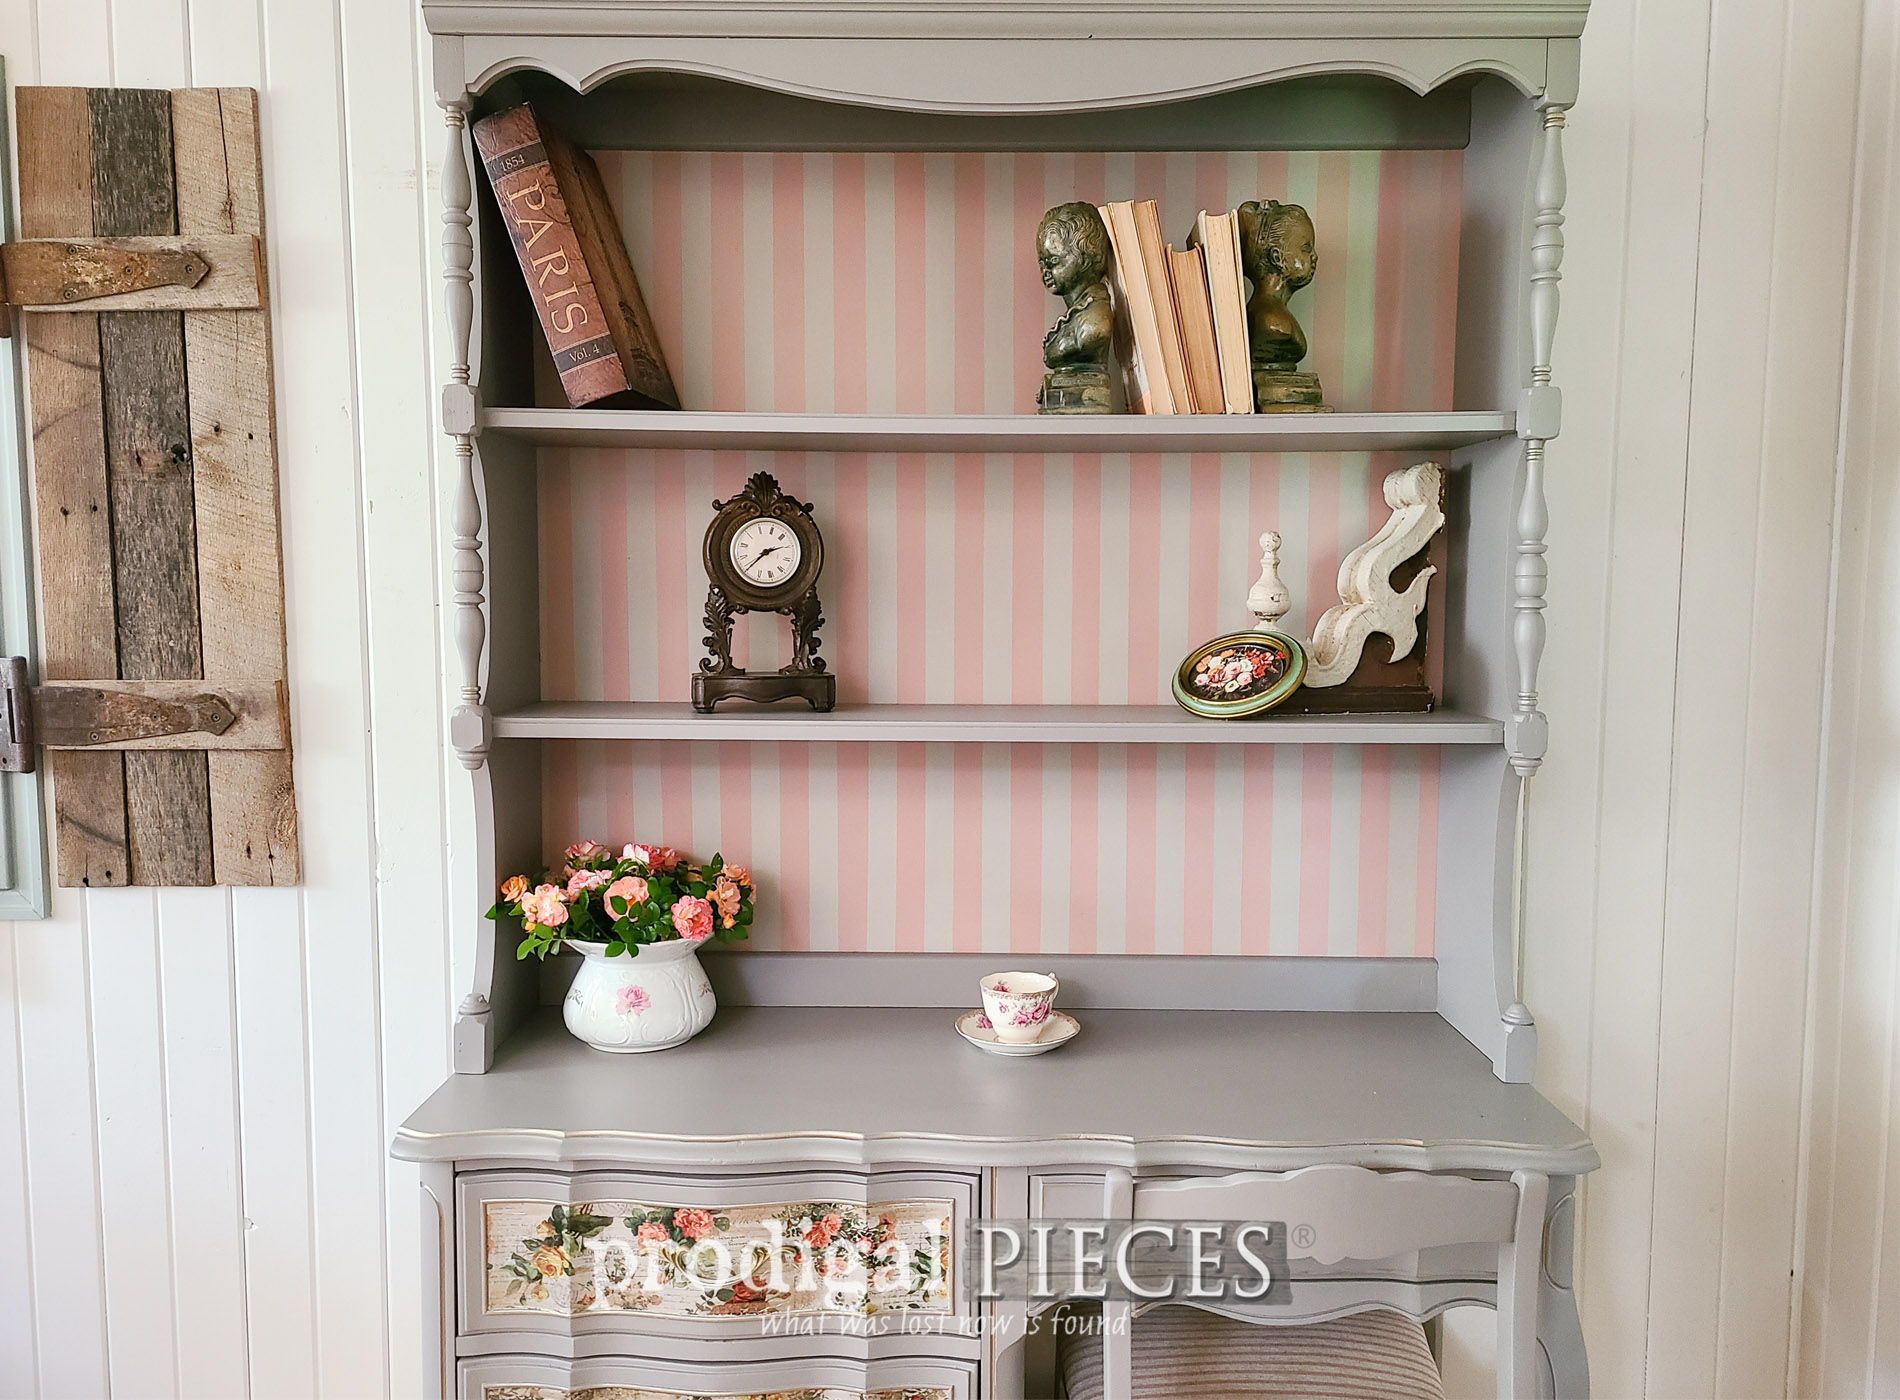 Featured Vintage French Provincial Desk Makeover by Larissa of Prodigal Pieces | prodigalpieces.com #prodigalpieces #furniture #diy #french #vintage